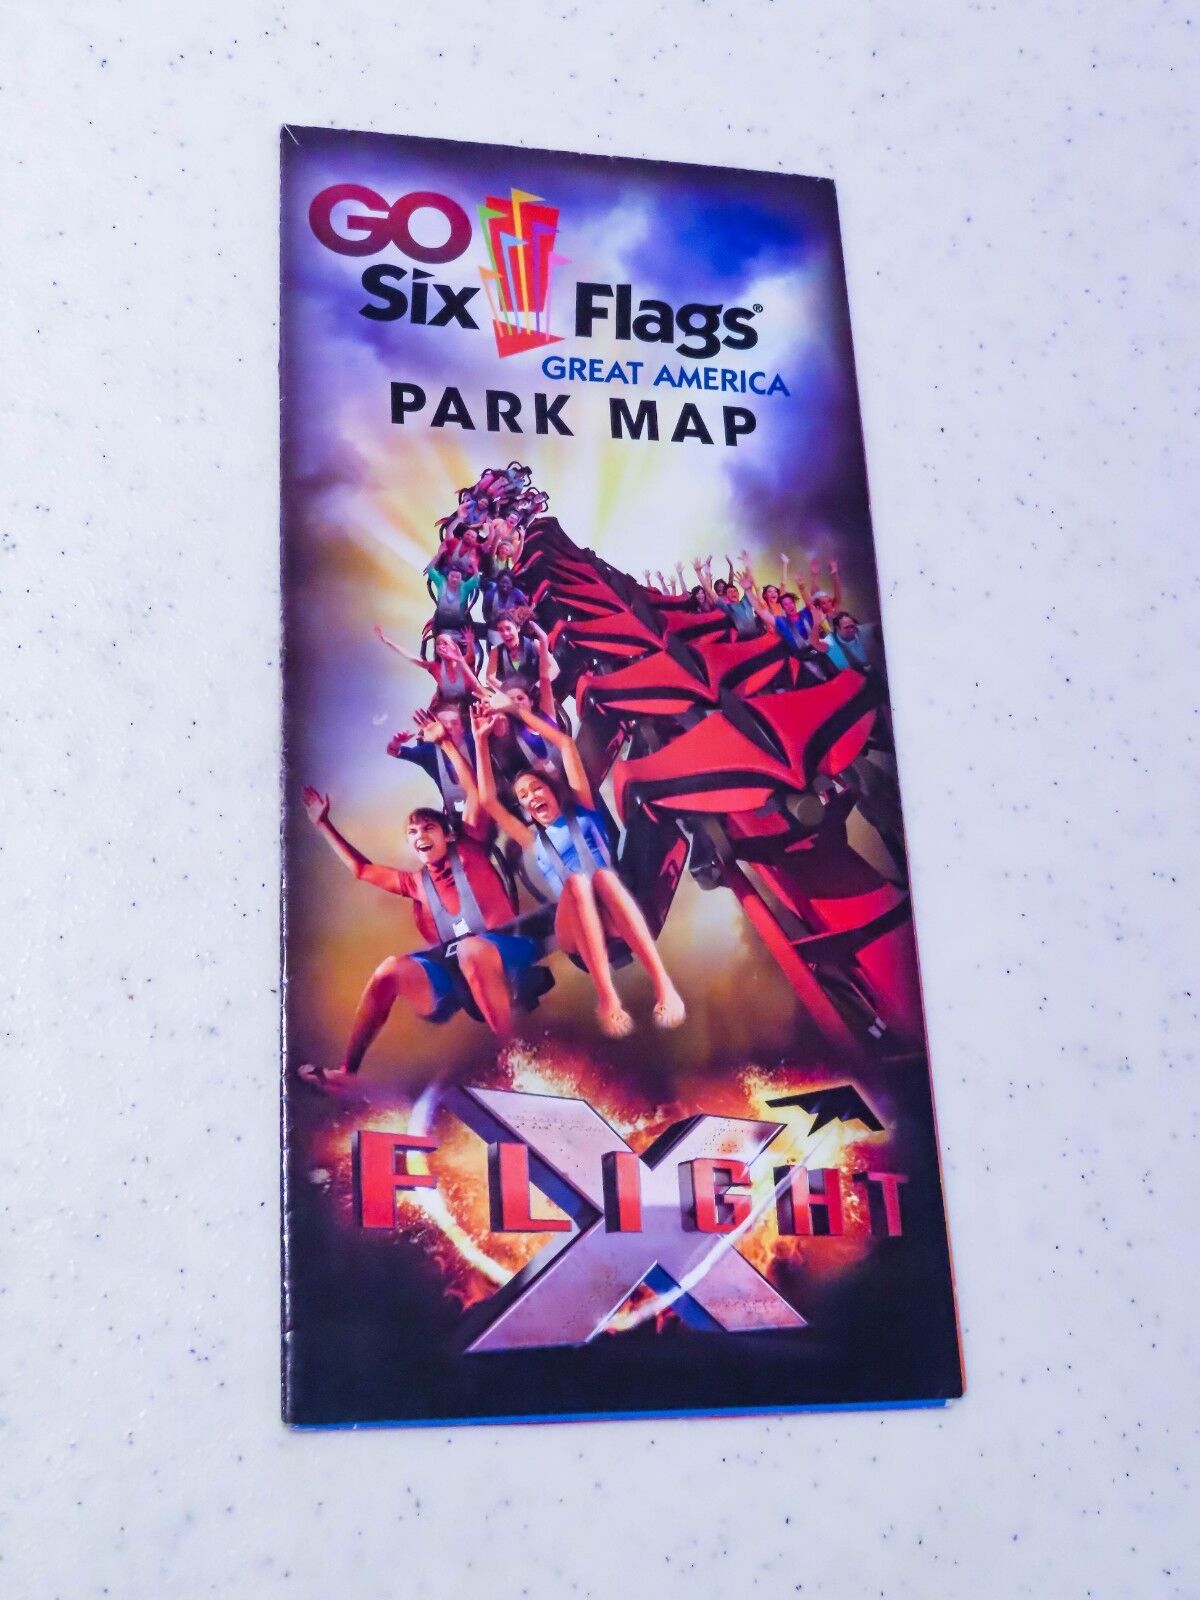 2012 Six Flags Great America park map featuring X-Flight